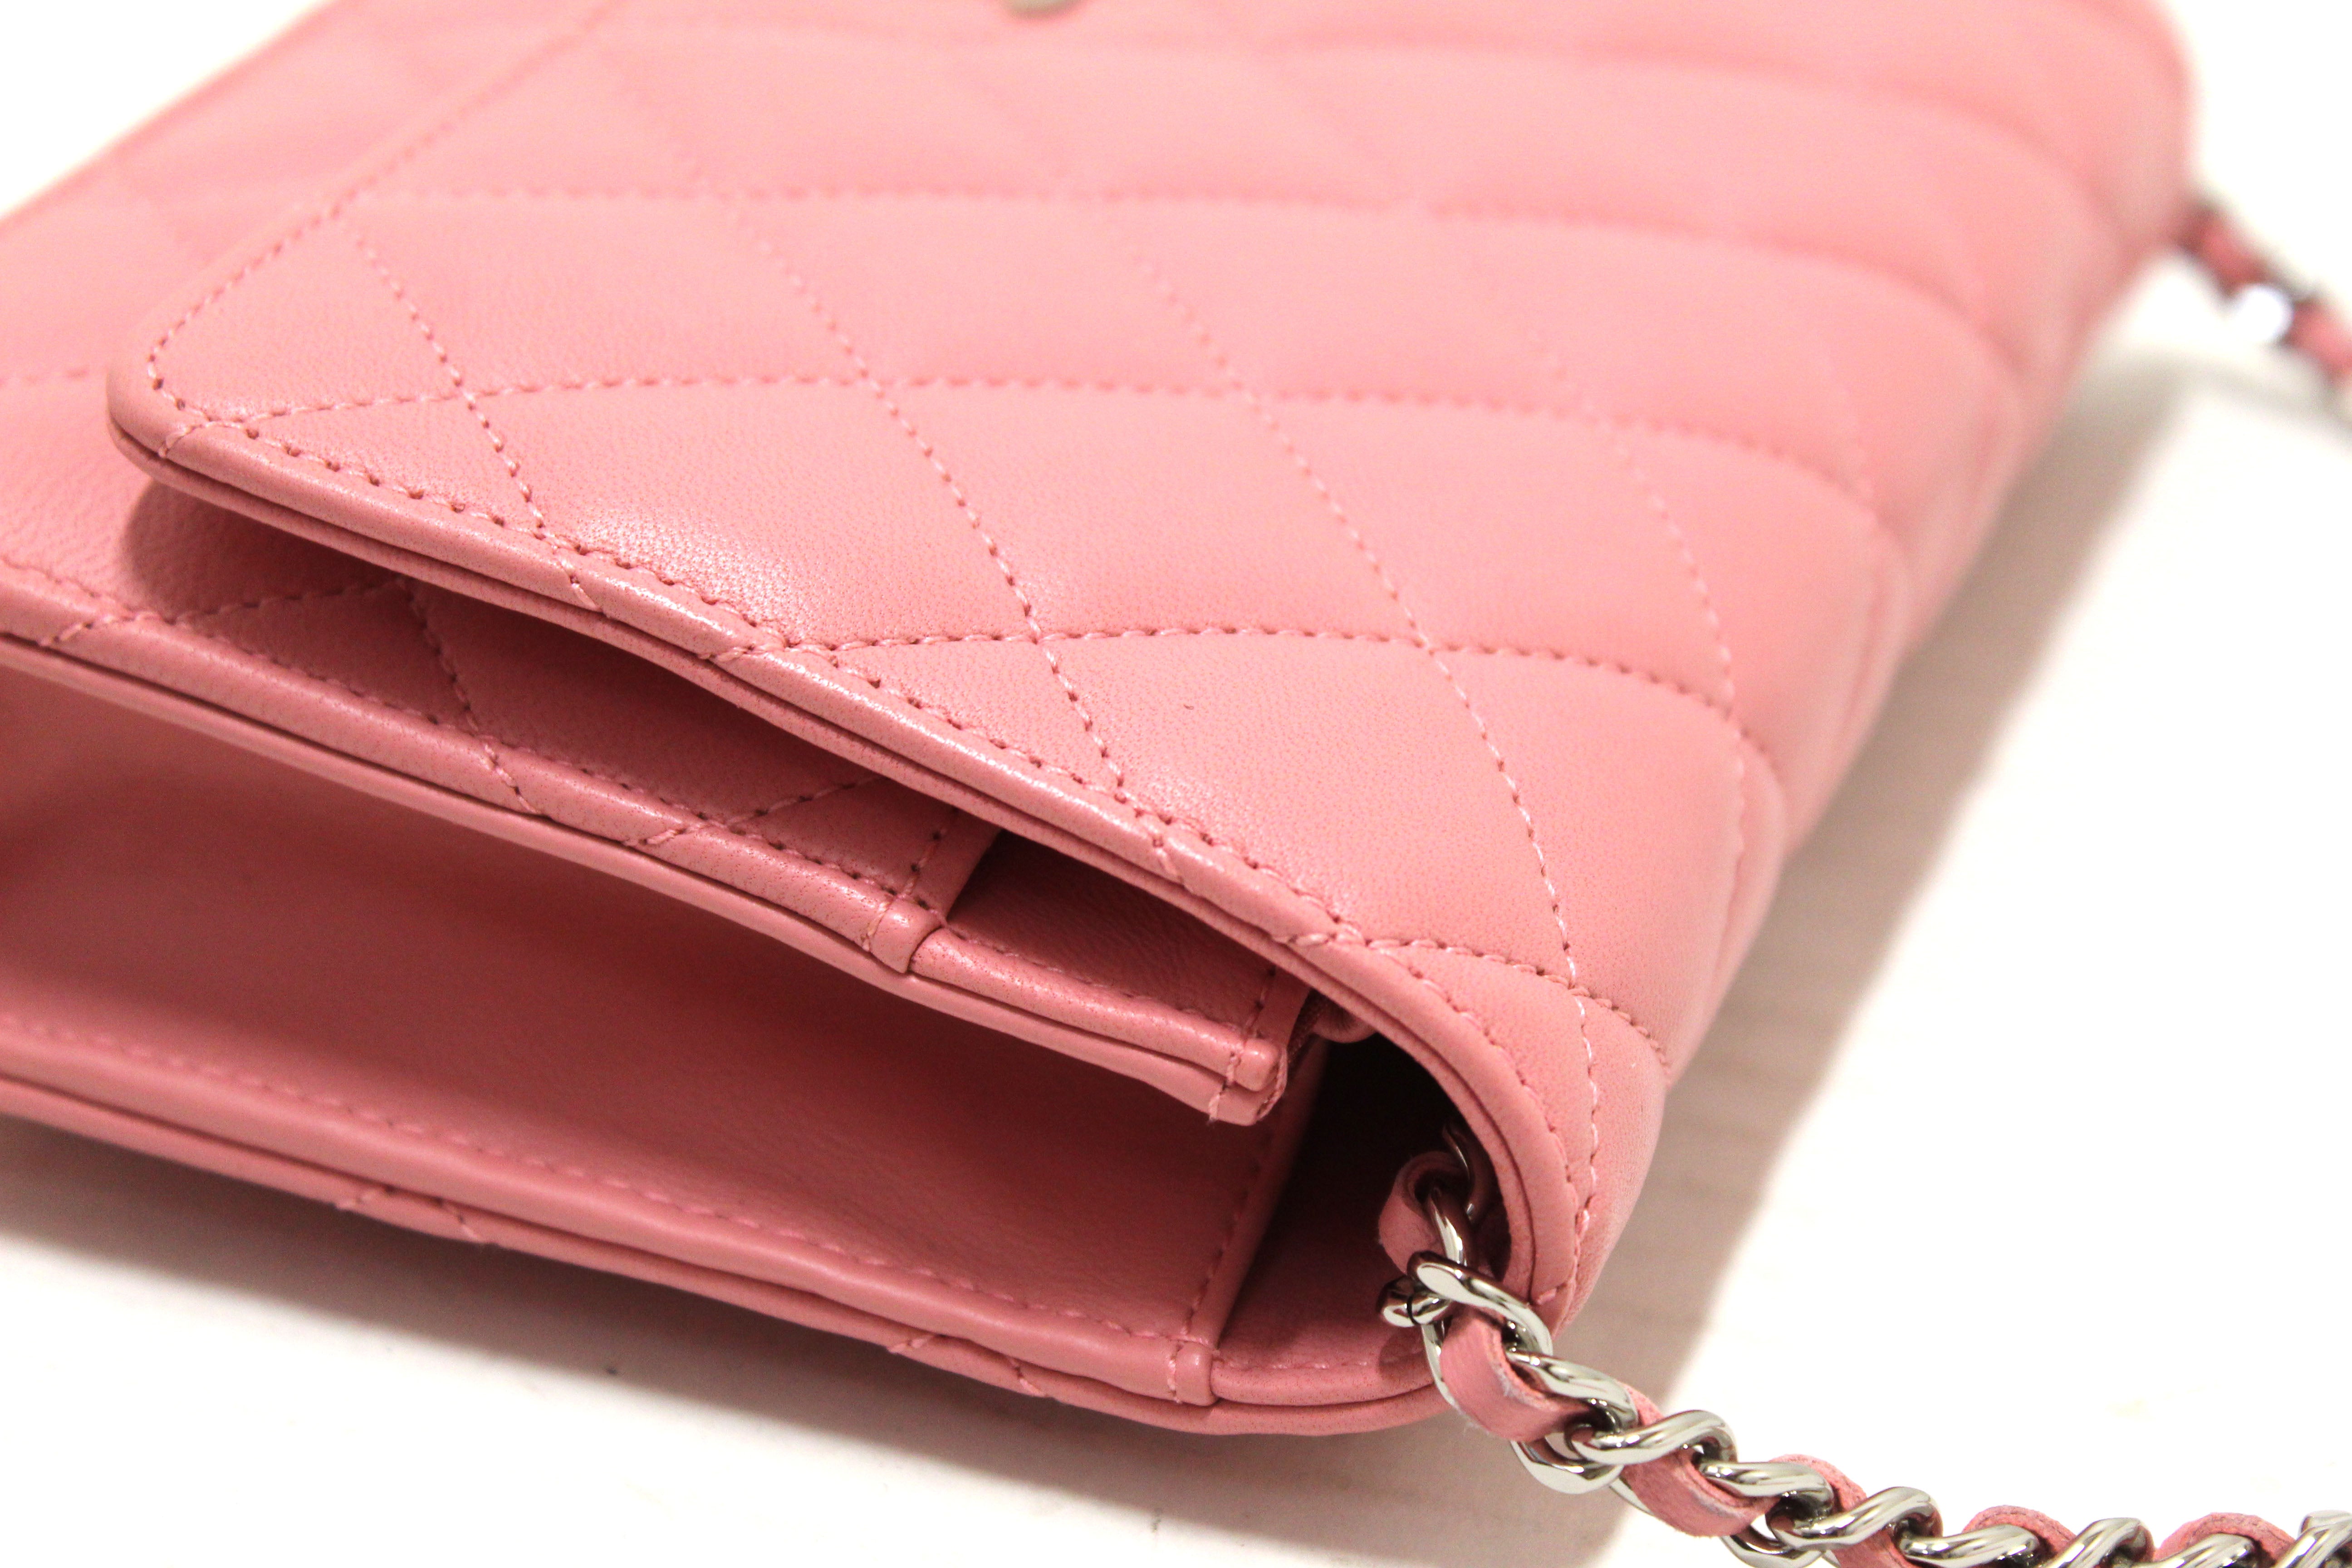 Authentic Chanel Pink Quilted Lambskin Leather Wallet On Chain WOC Messenger Bag